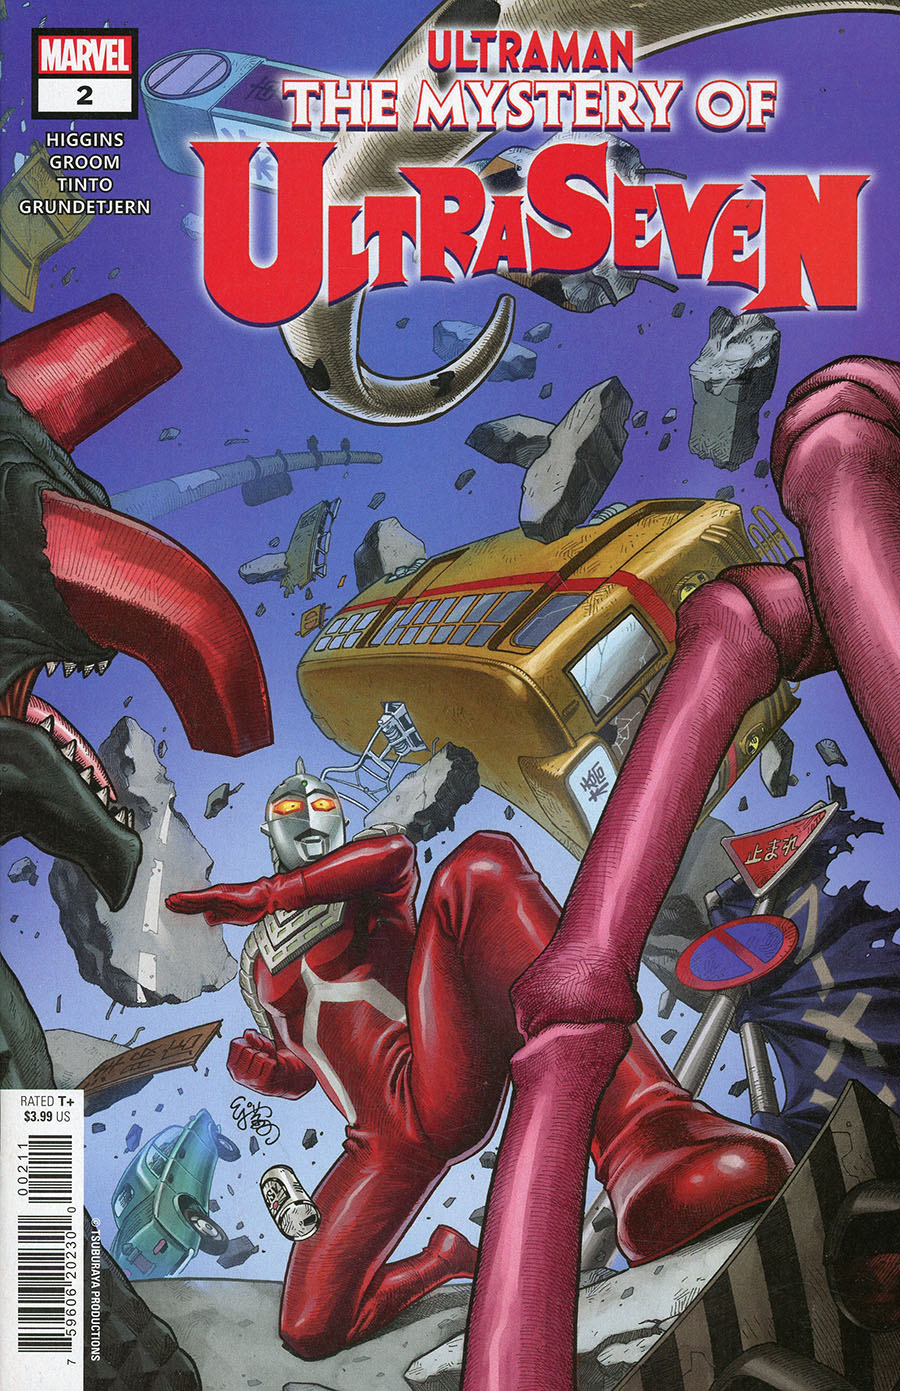 Ultraman Mystery Of Ultraseven #2 Cover A Regular EJ Su Cover